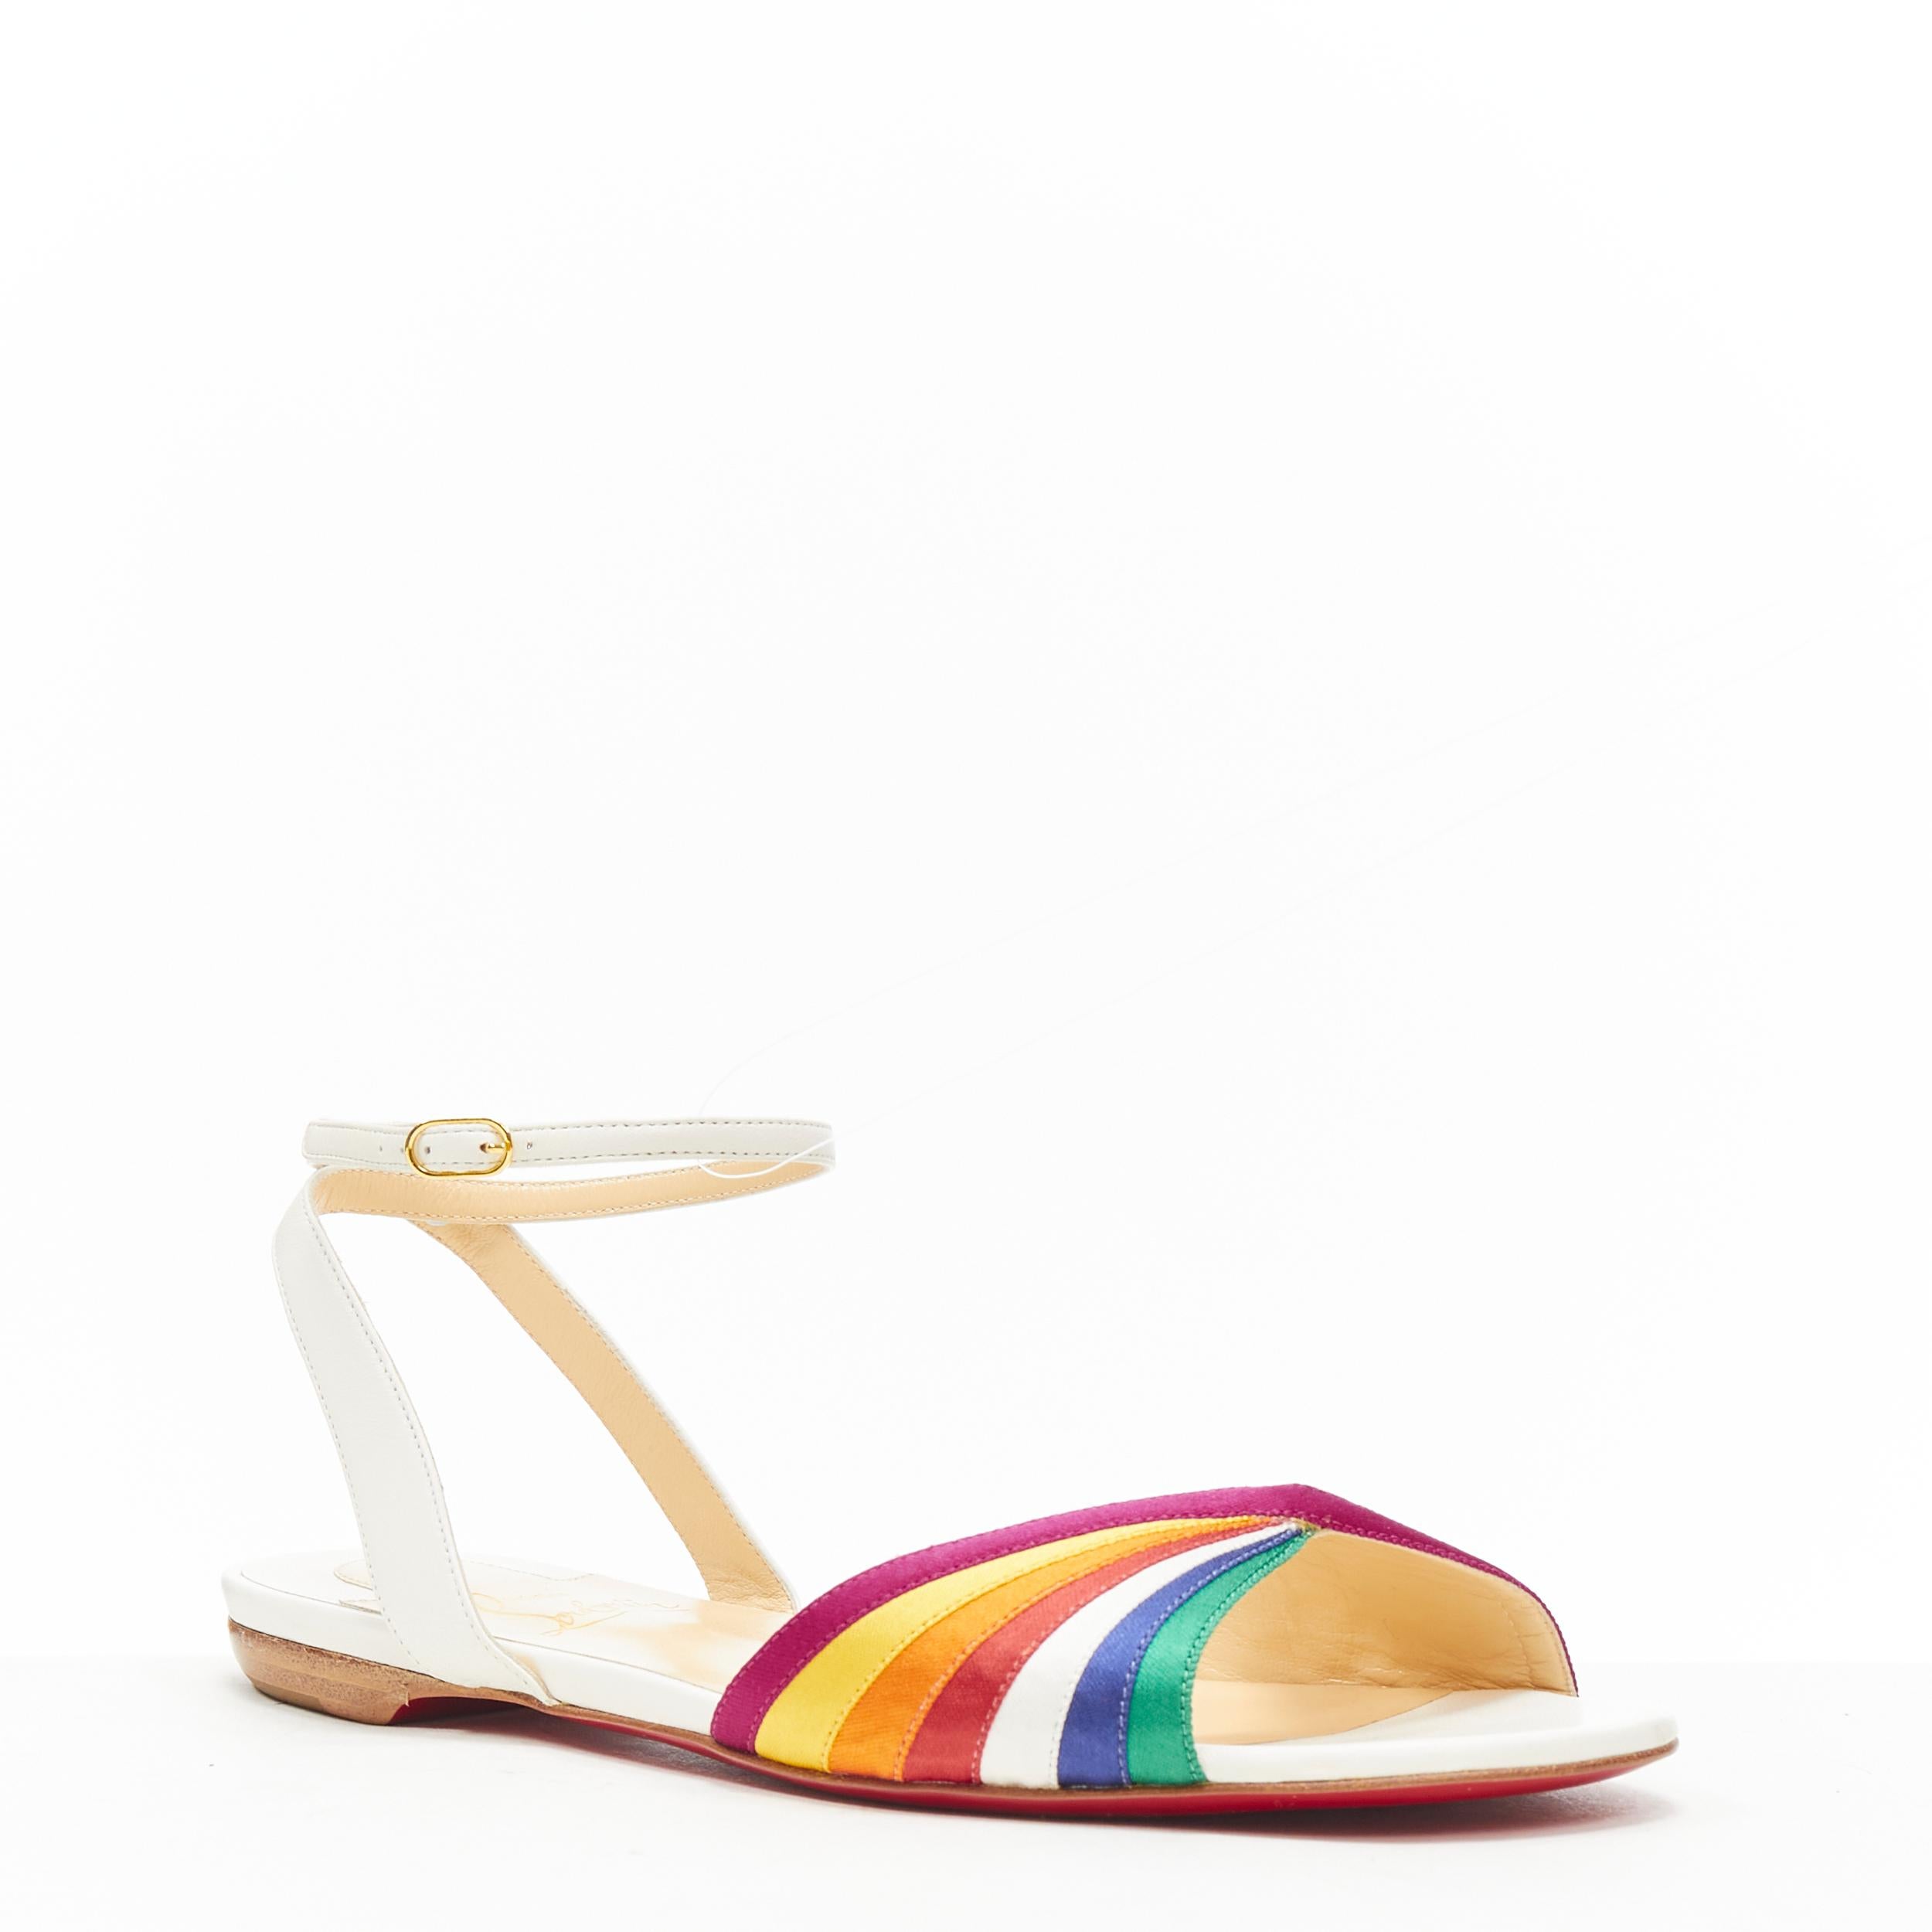 new CHRISTIAN LOUBOUTIN Naseeba rainbow twist satin ankle strap sandals EU38 
Reference: TGAS/B01019 
Brand: Christian Louboutin 
Designer: Christian Louboutin 
Model: Naseeba rainbow sandals 
Material: Silk 
Color: Multicolour 
Pattern: Solid